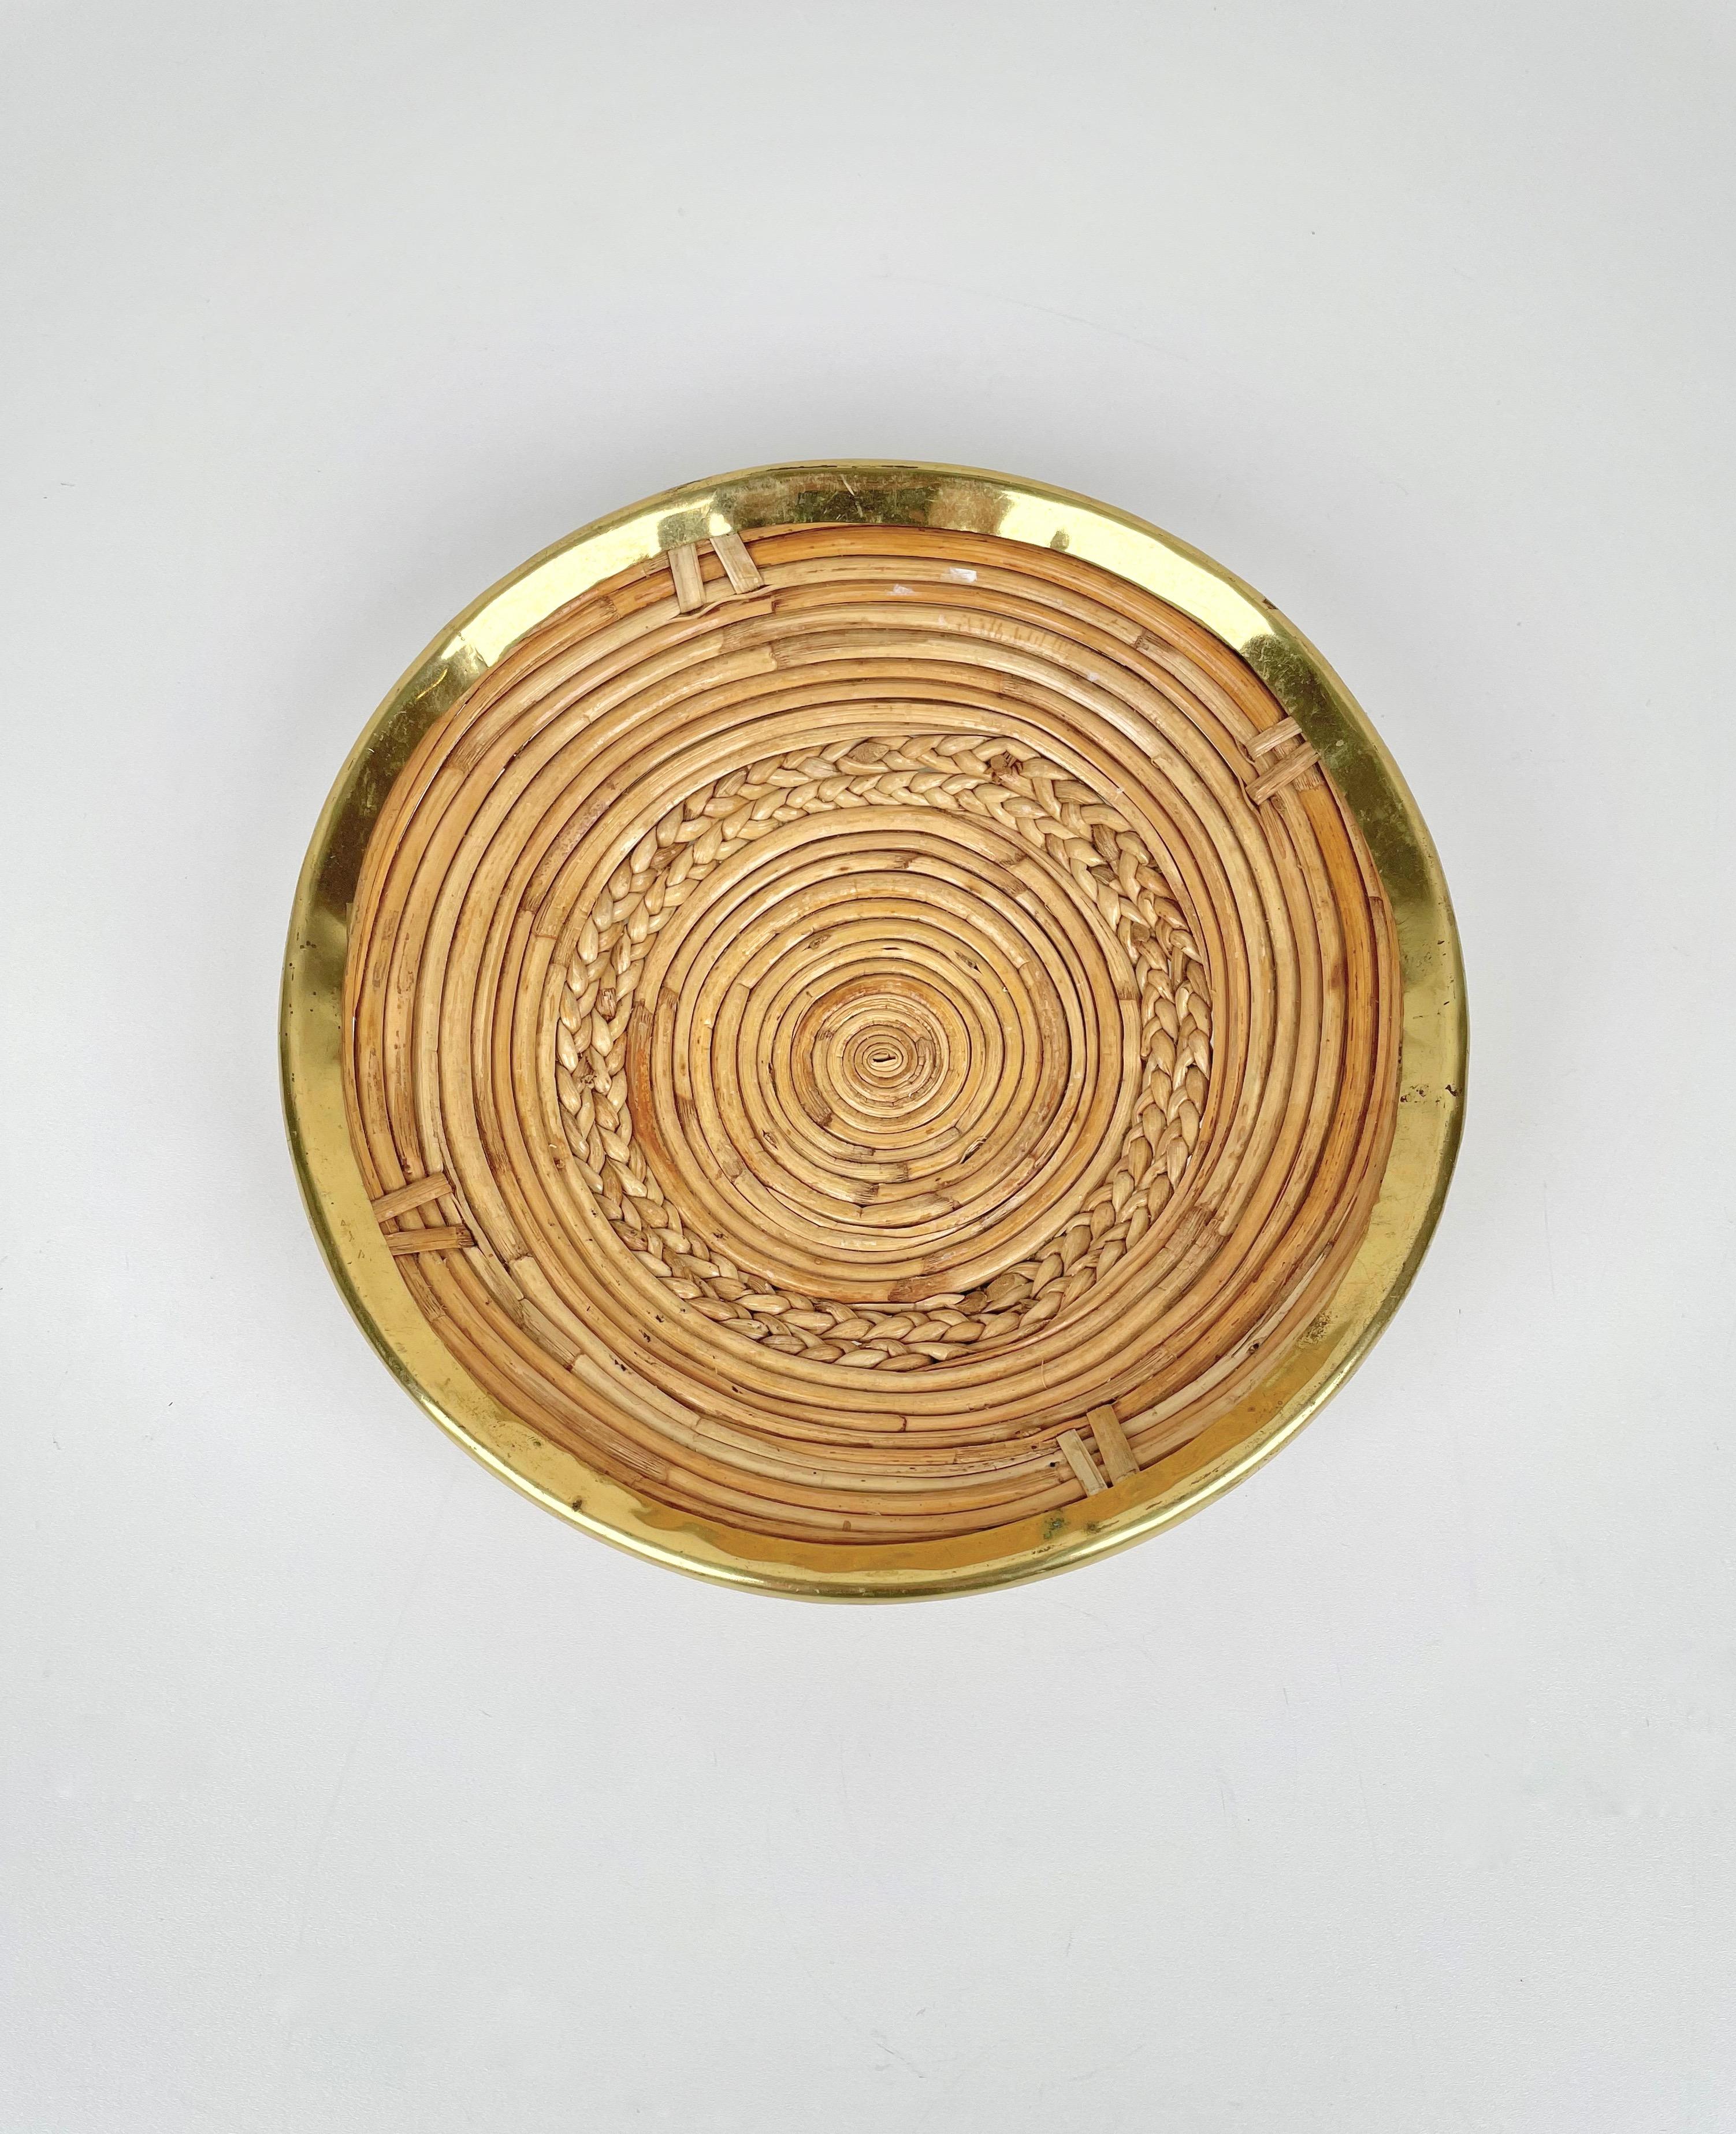 Round Rattan & Brass Plate Centerpiece, Italy, 1970s For Sale 1